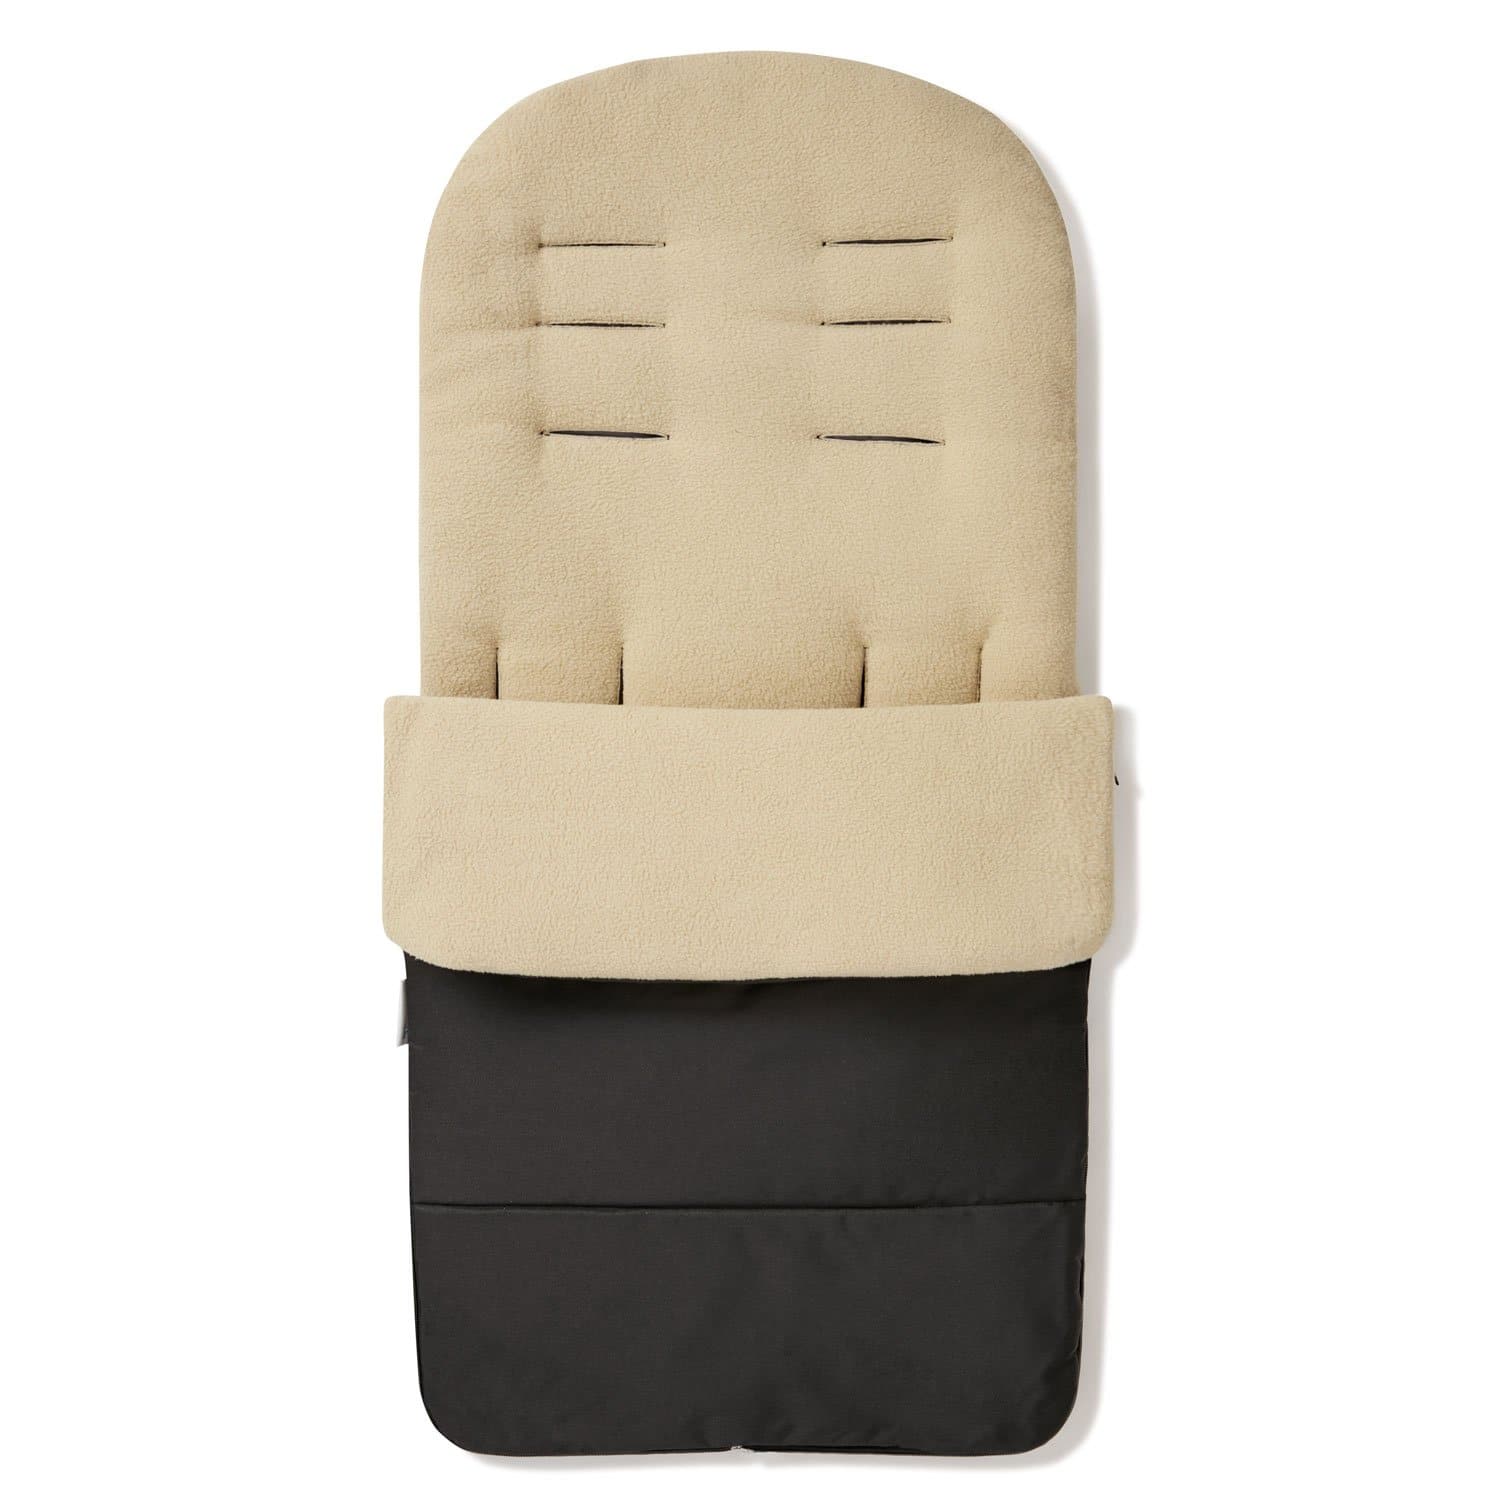 Premium Footmuff / Cosy Toes Compatible with Esprit - Desert Sand / Fits All Models | For Your Little One